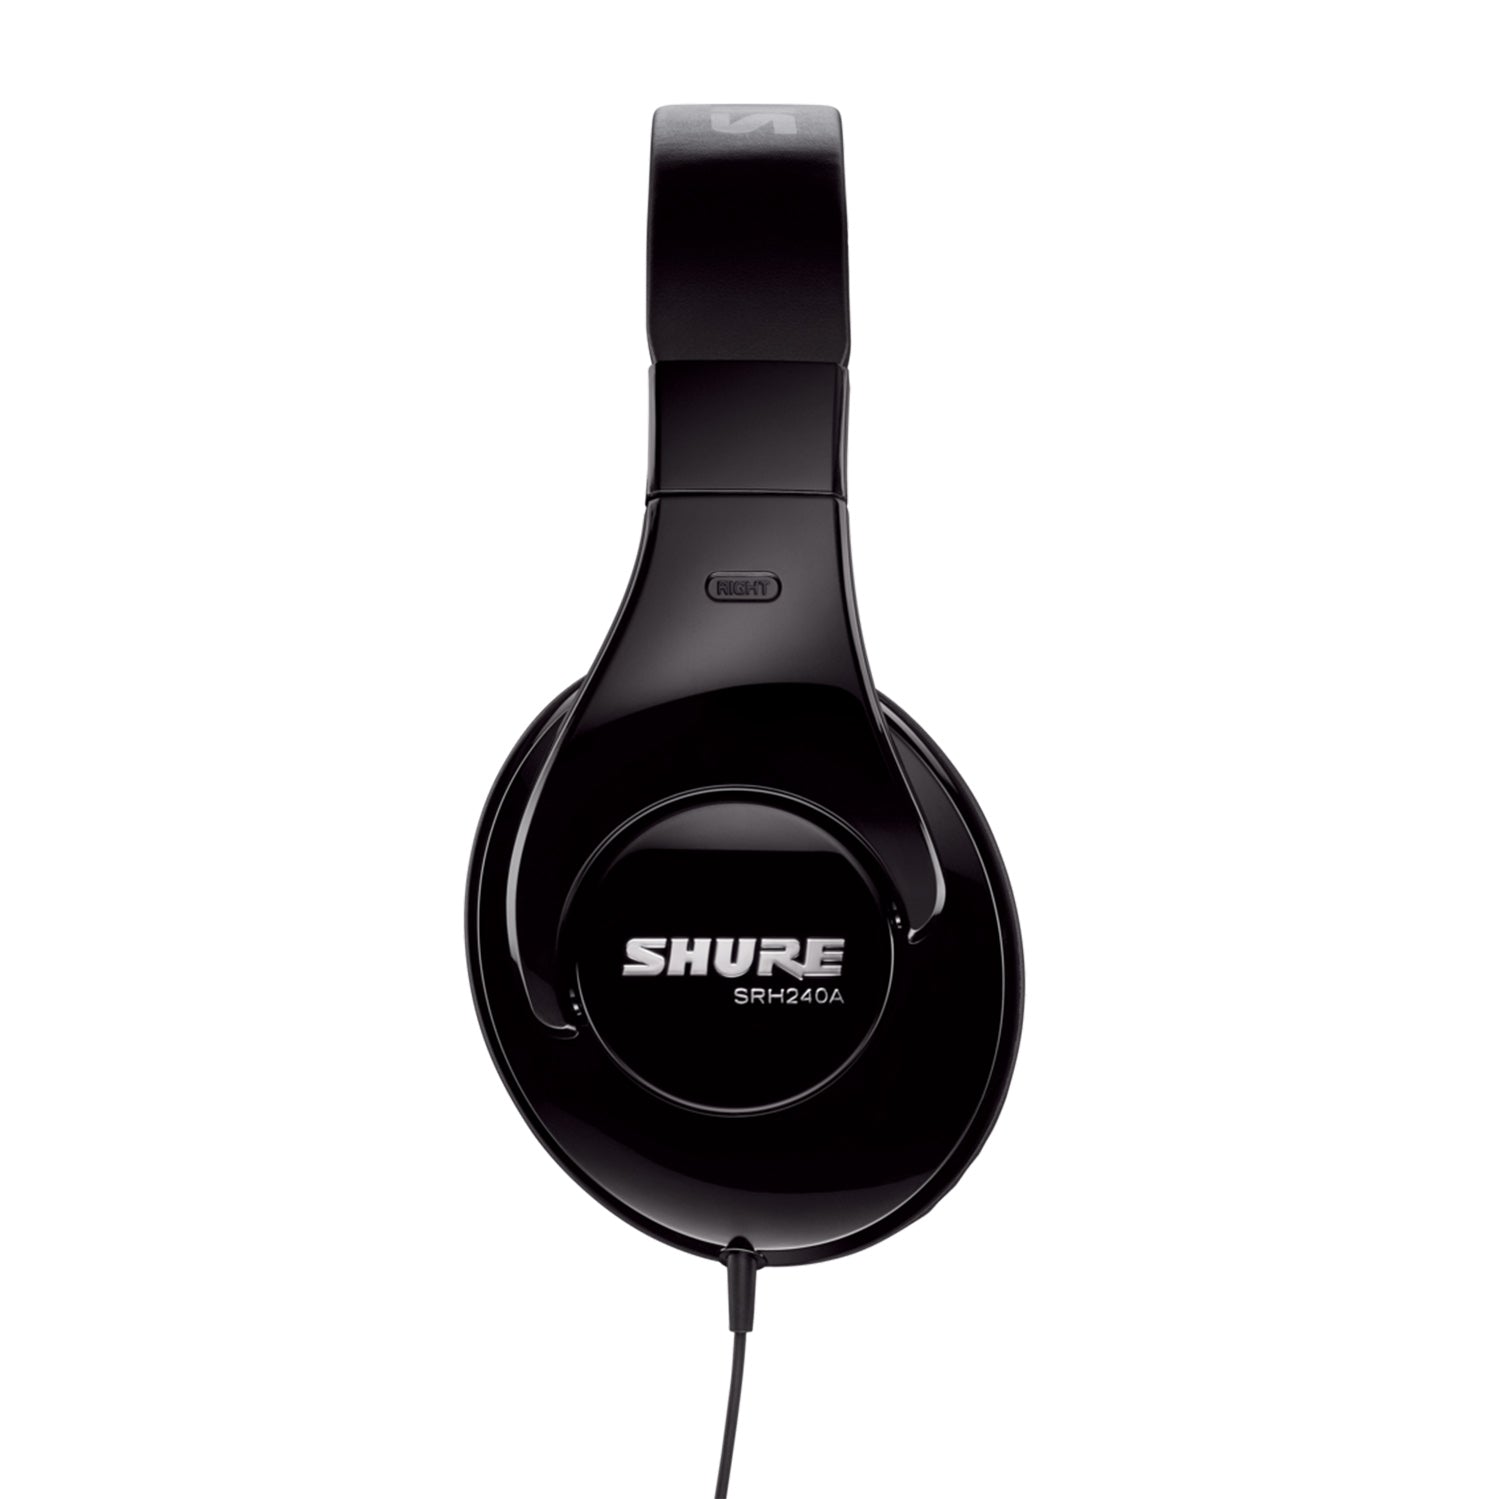 Shure Mobile Recording Kit With SRH240A Headphones and MV5 Microphone Including Lightning and USB Cables - Hollywood DJ